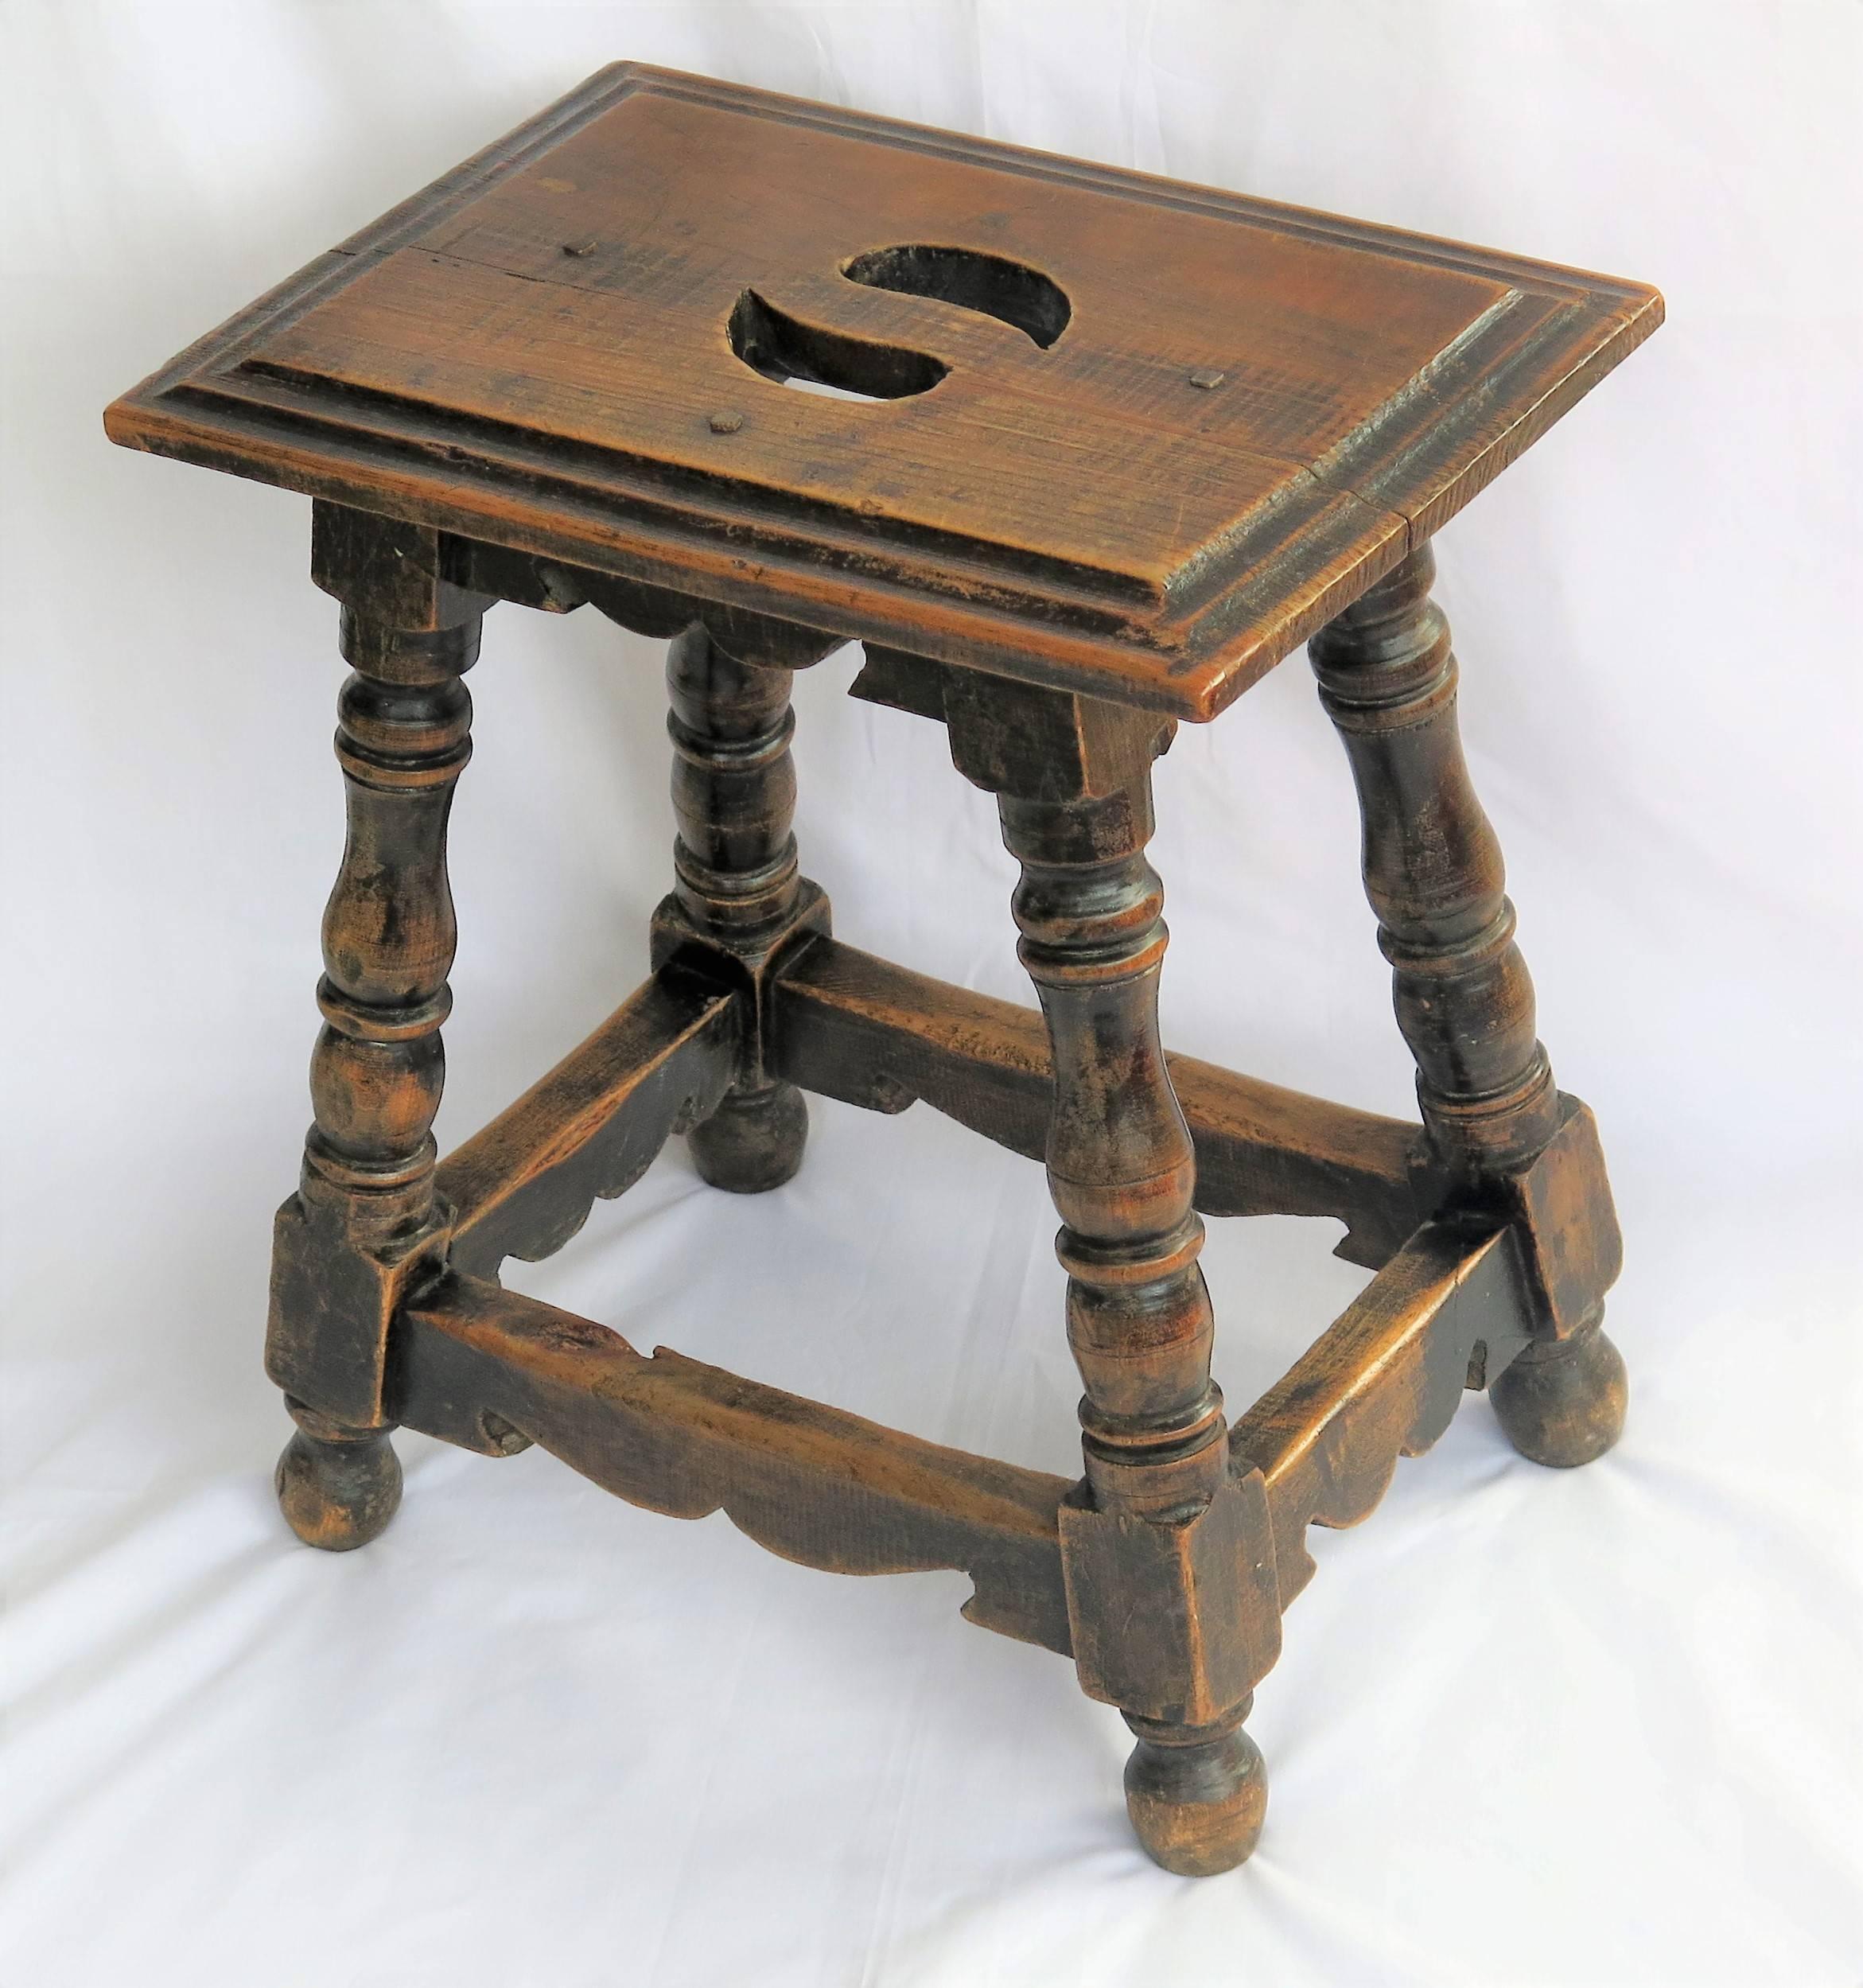 French Provincial 19th Century Walnut Stool Jointed and pegged with turned Legs, French Ca 1830